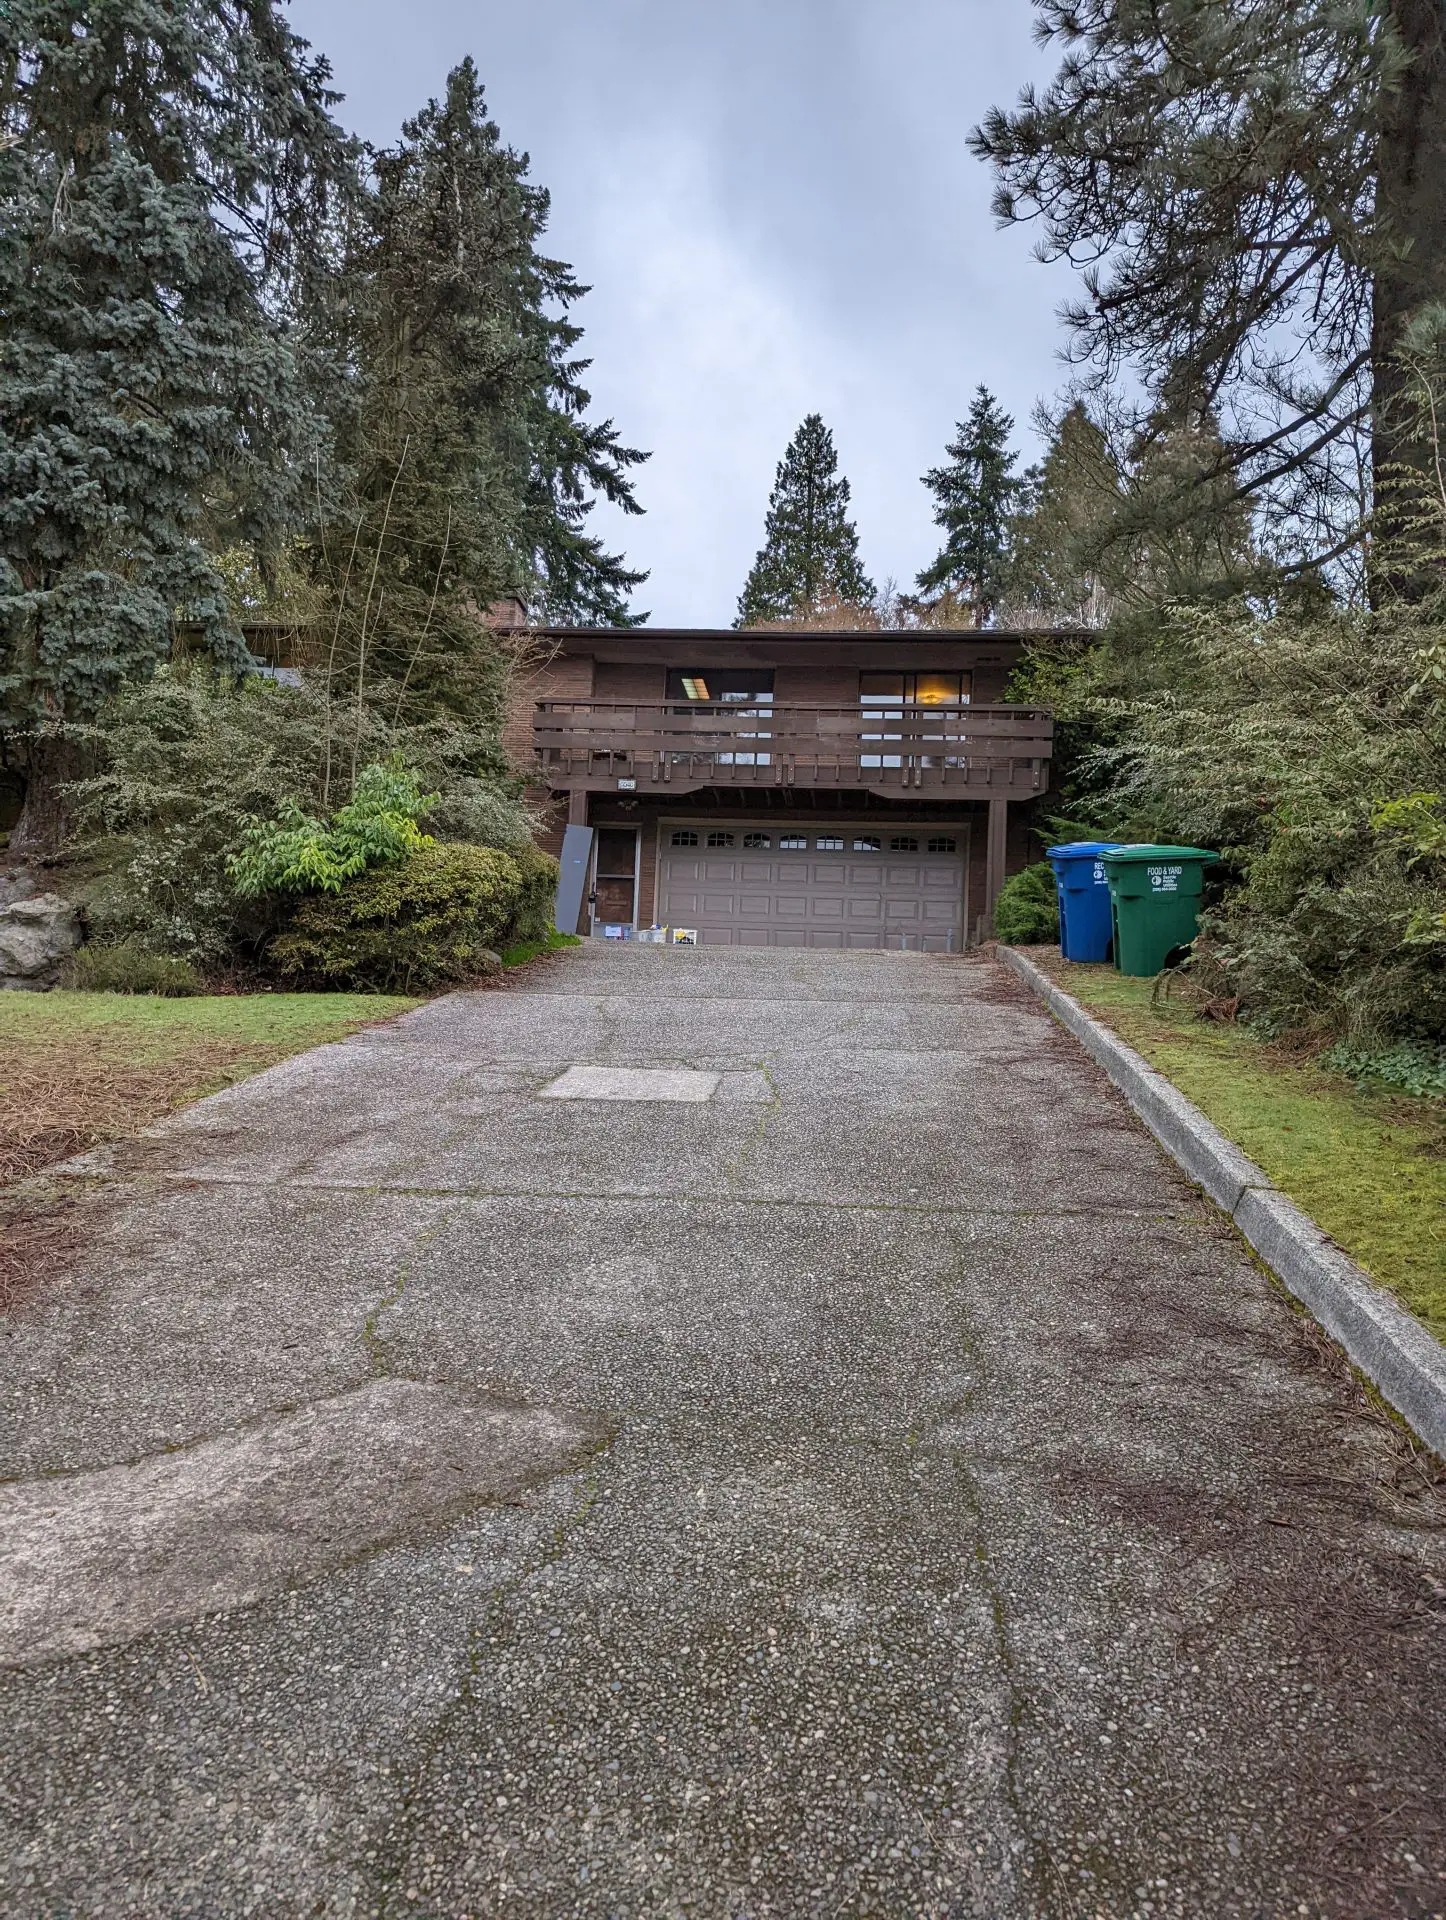 A picture of a house with a long driveway where the estate sale took place.